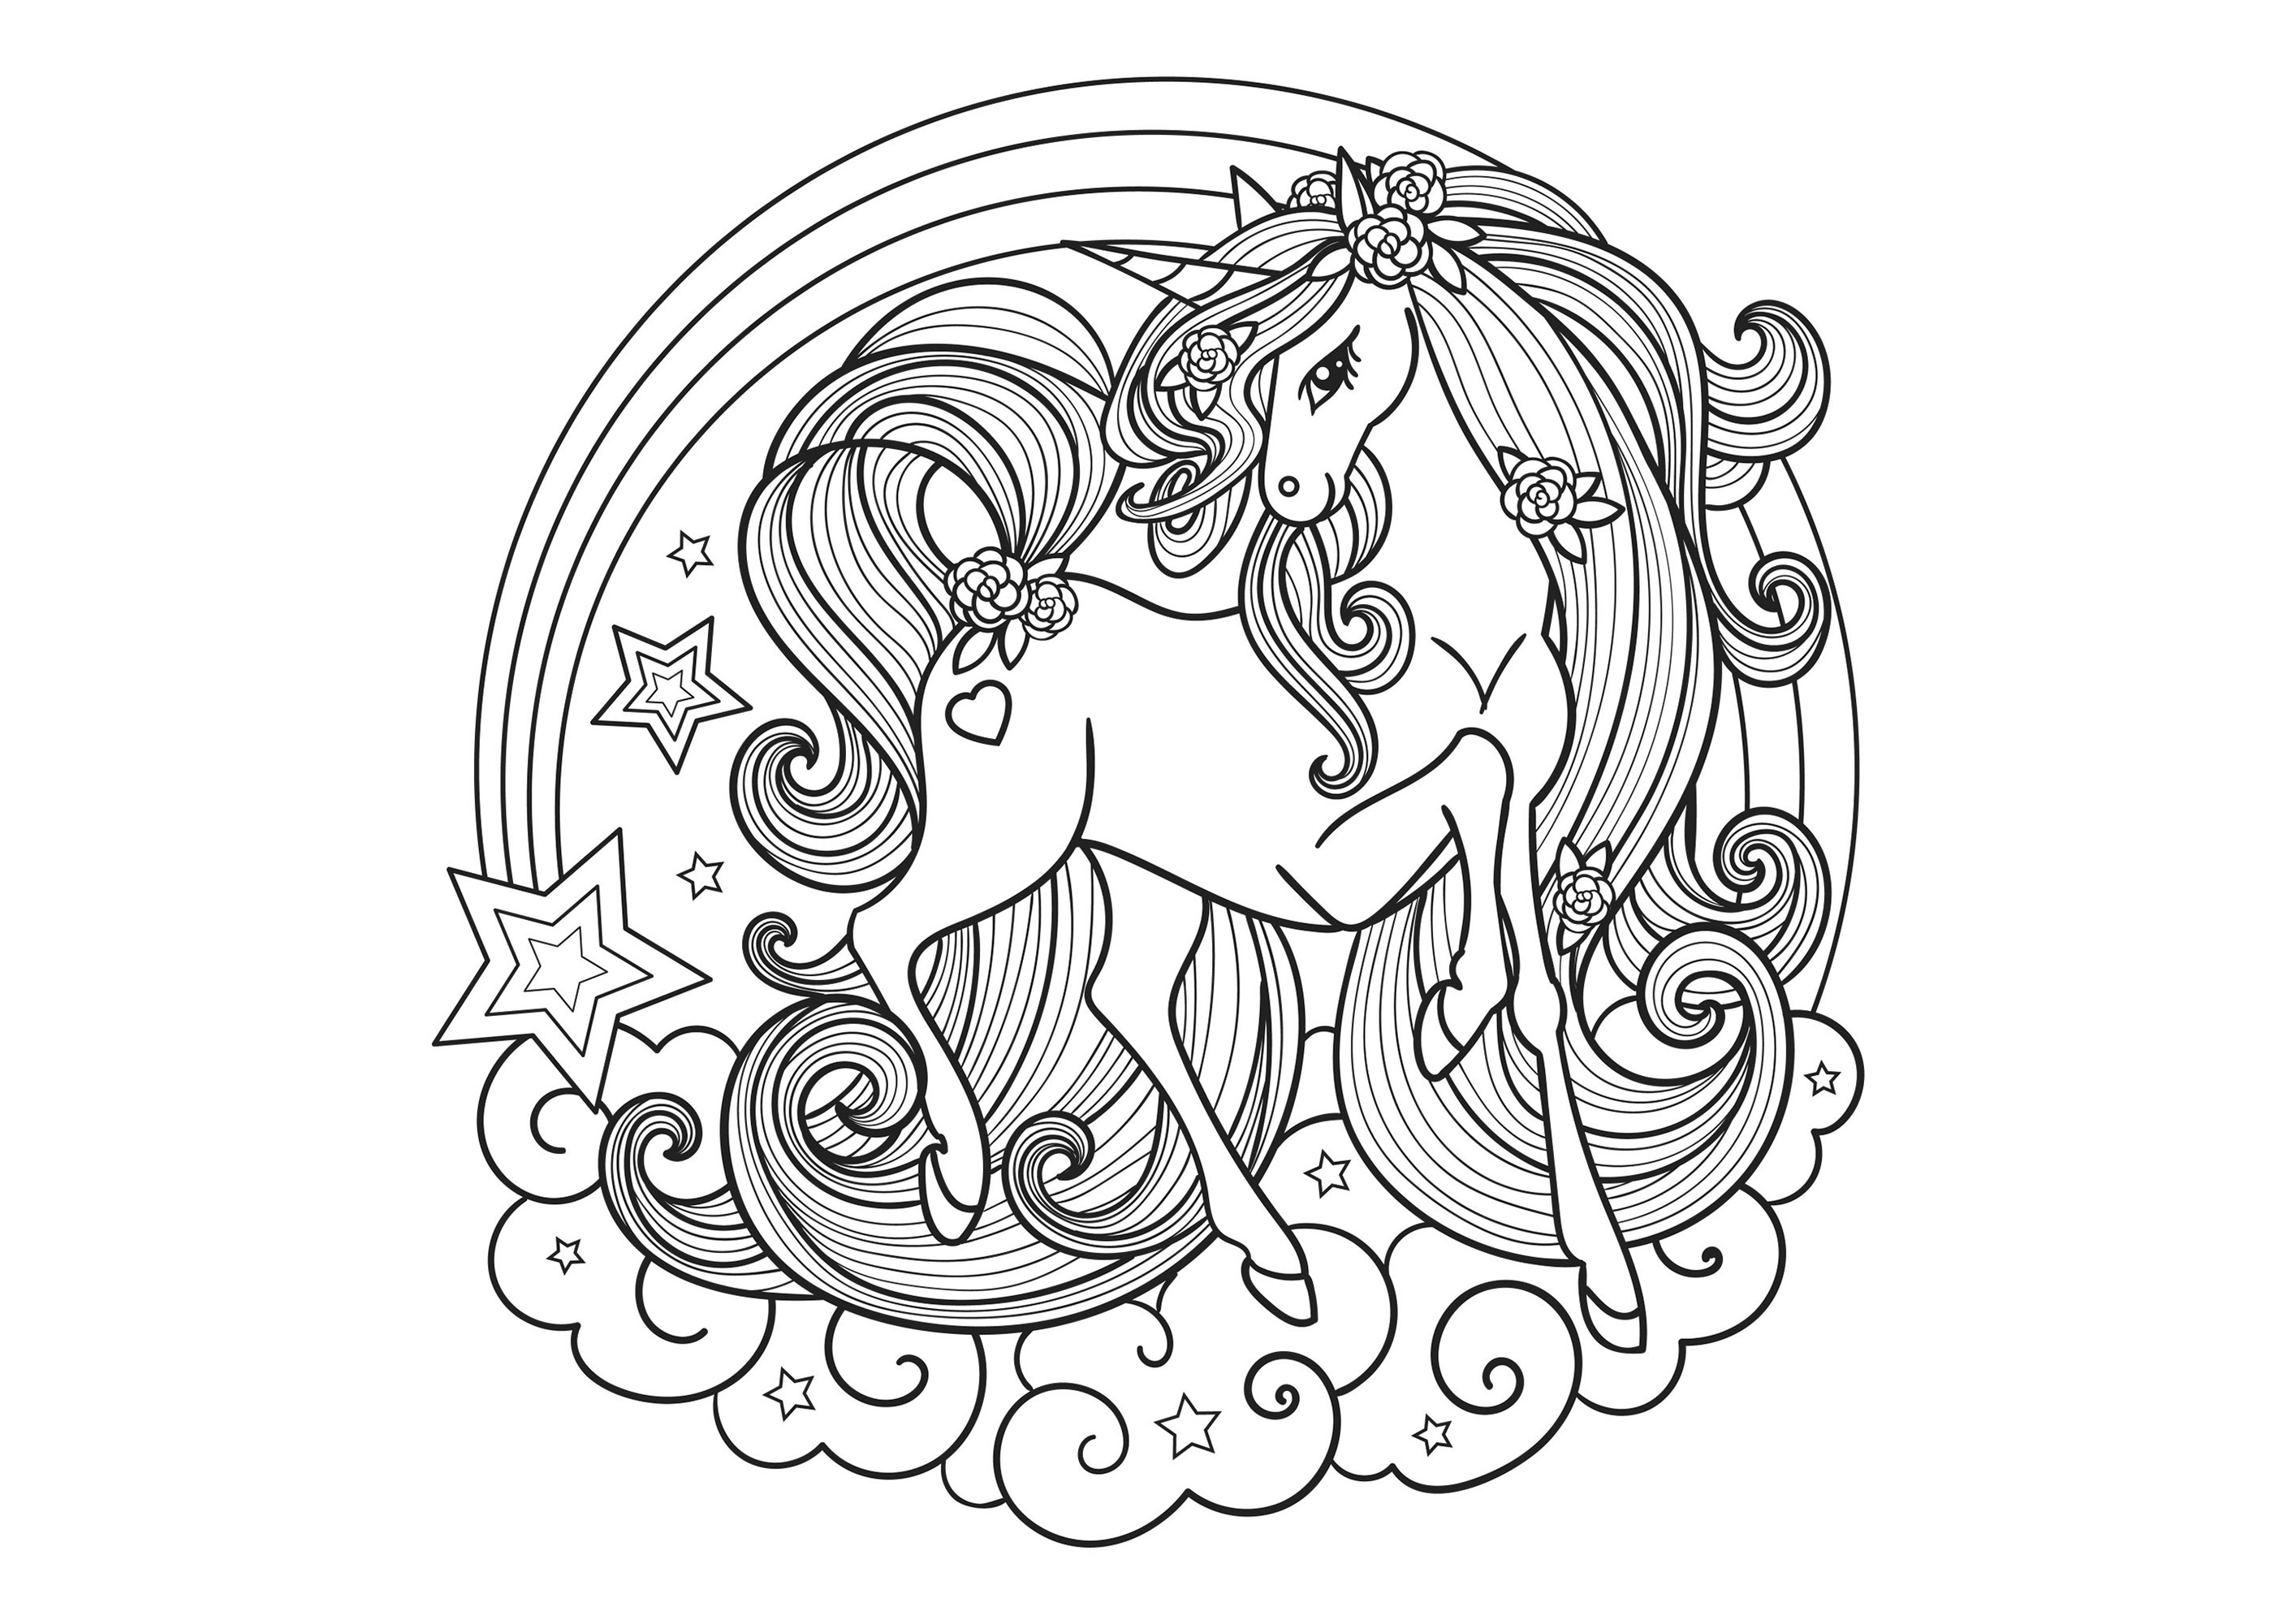 Beautiful and very elegant unicorn, within a Mandala made up of clouds and a shooting star, Artist : Zerlina1973   Source : 123rf